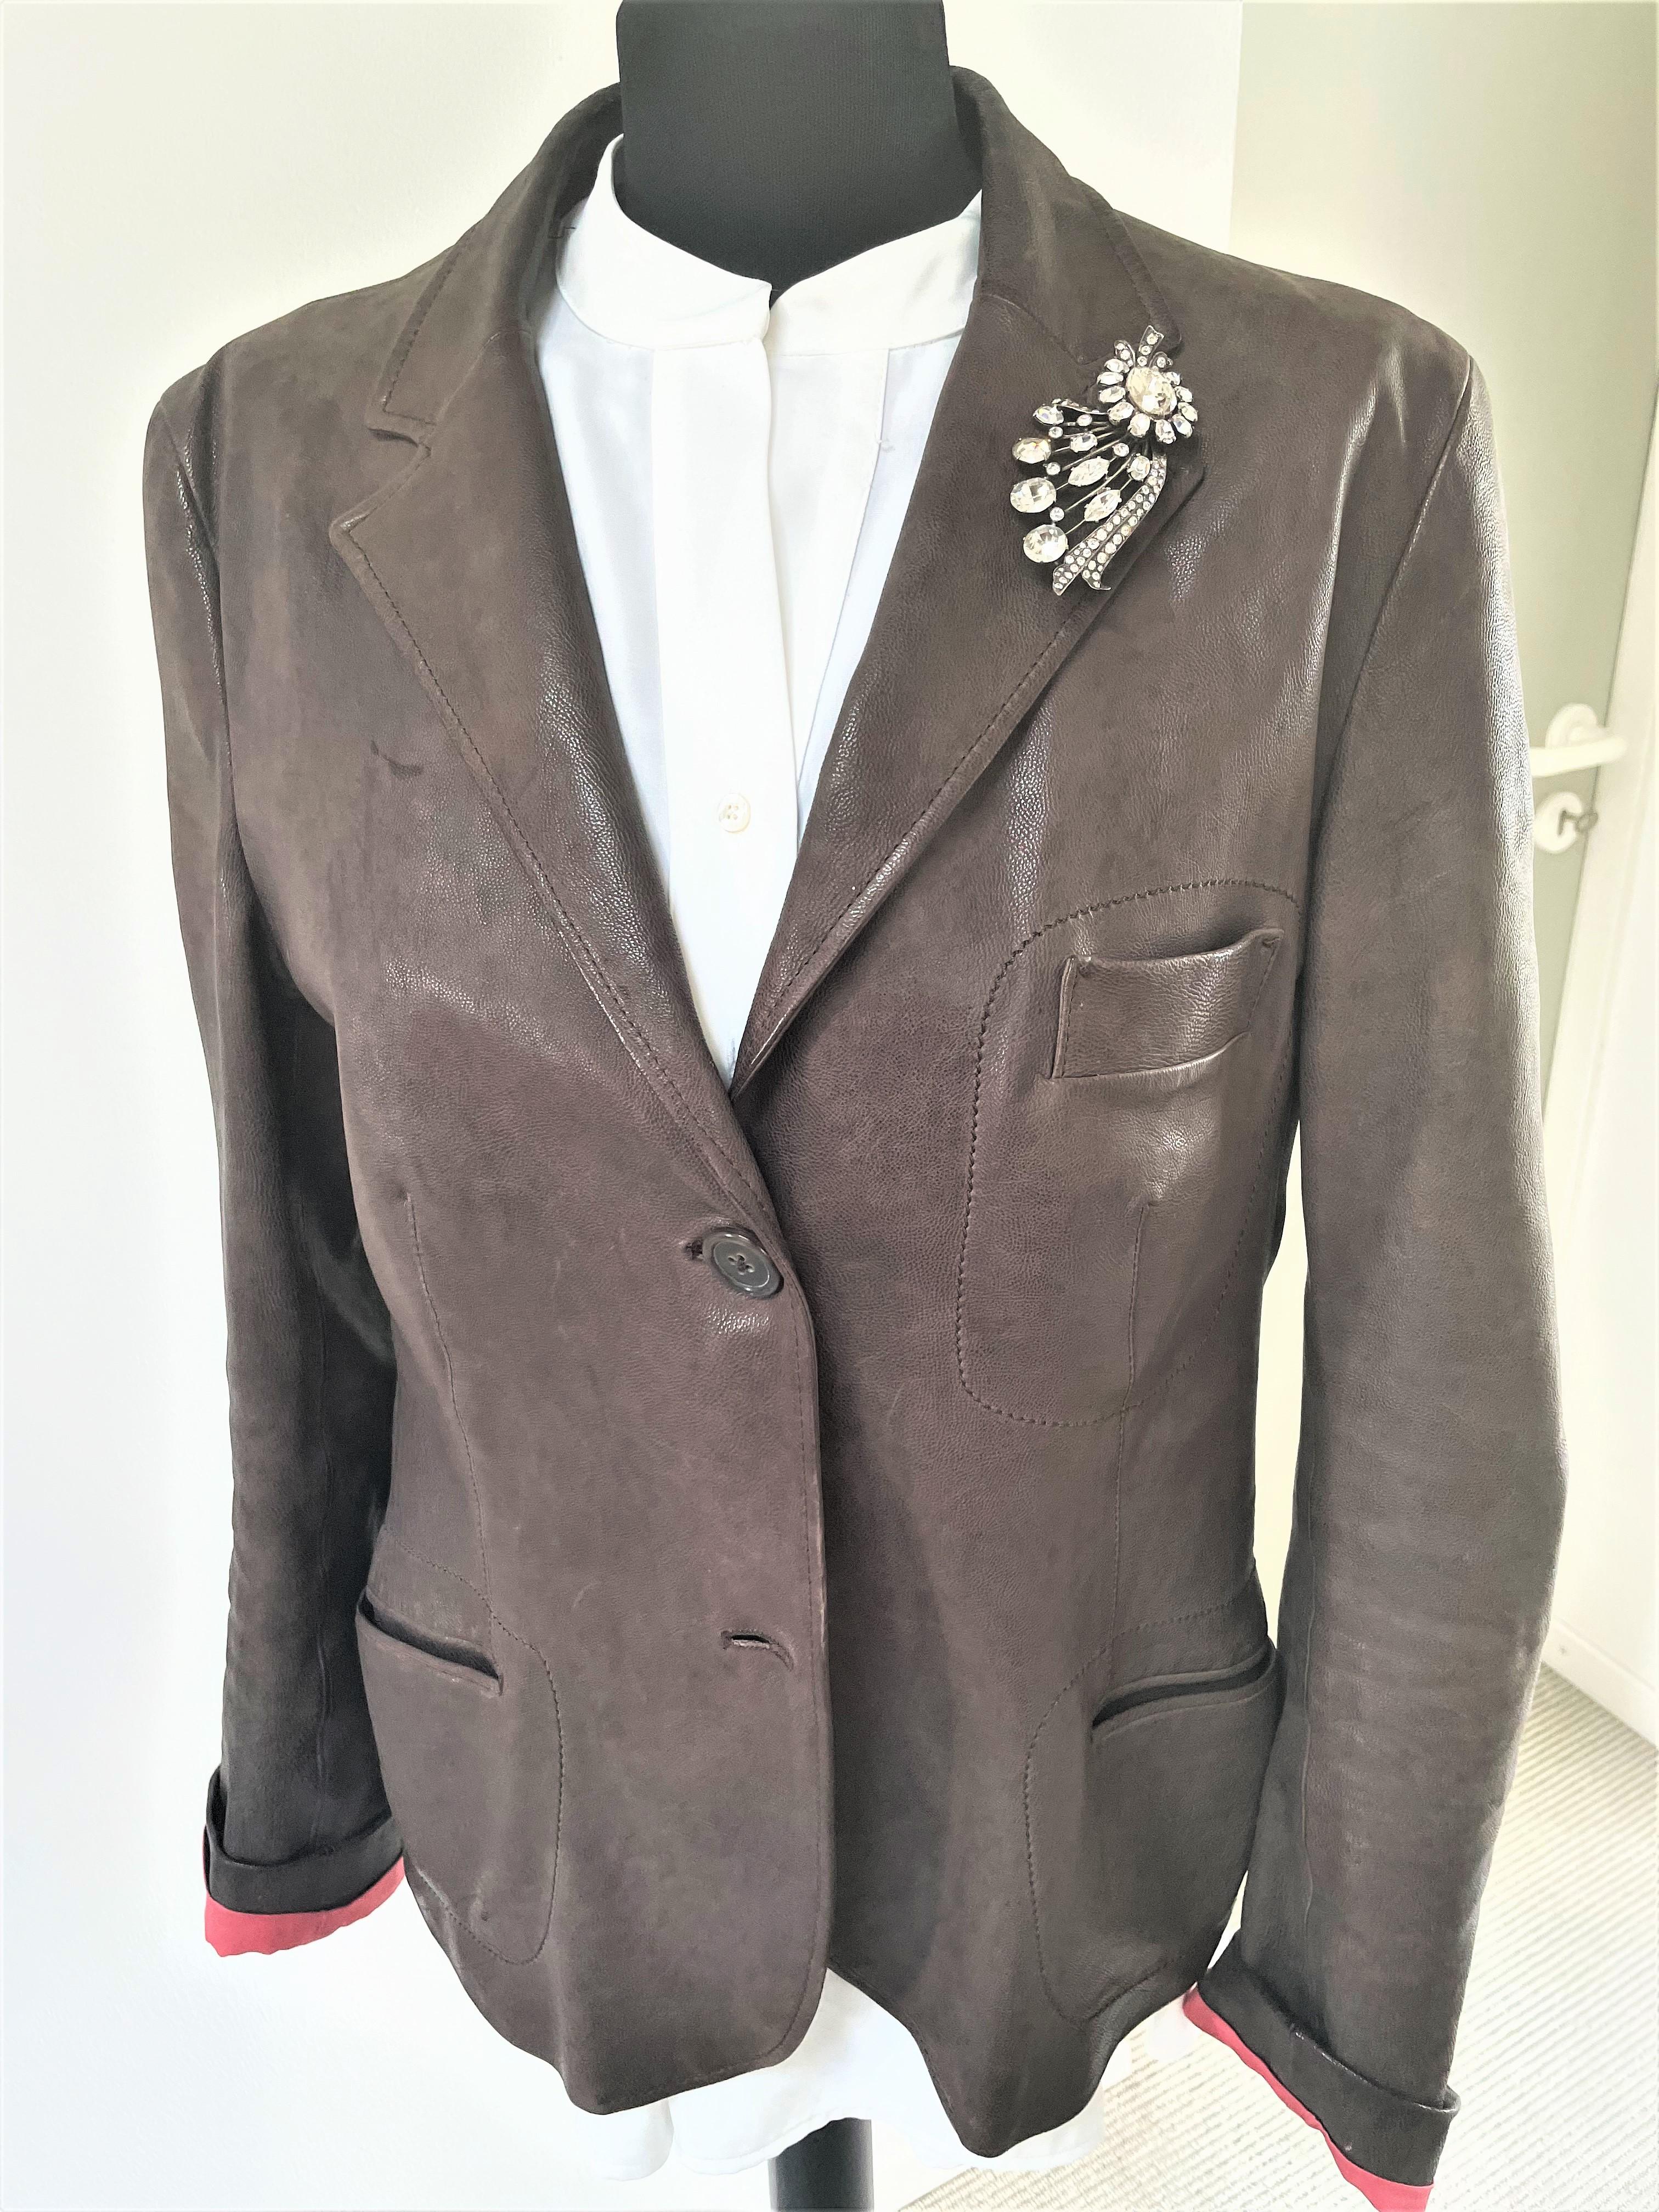 About
A beautiful brown blazer made of smooth leather by Jil Sander, the pink lining is very decorative. German size 44. The model corresponds to size 42 German
Measurement:
Chest 43 inches ( 110 cm ) Center Back Length 25 inches ( 64 cm ), Sleeve